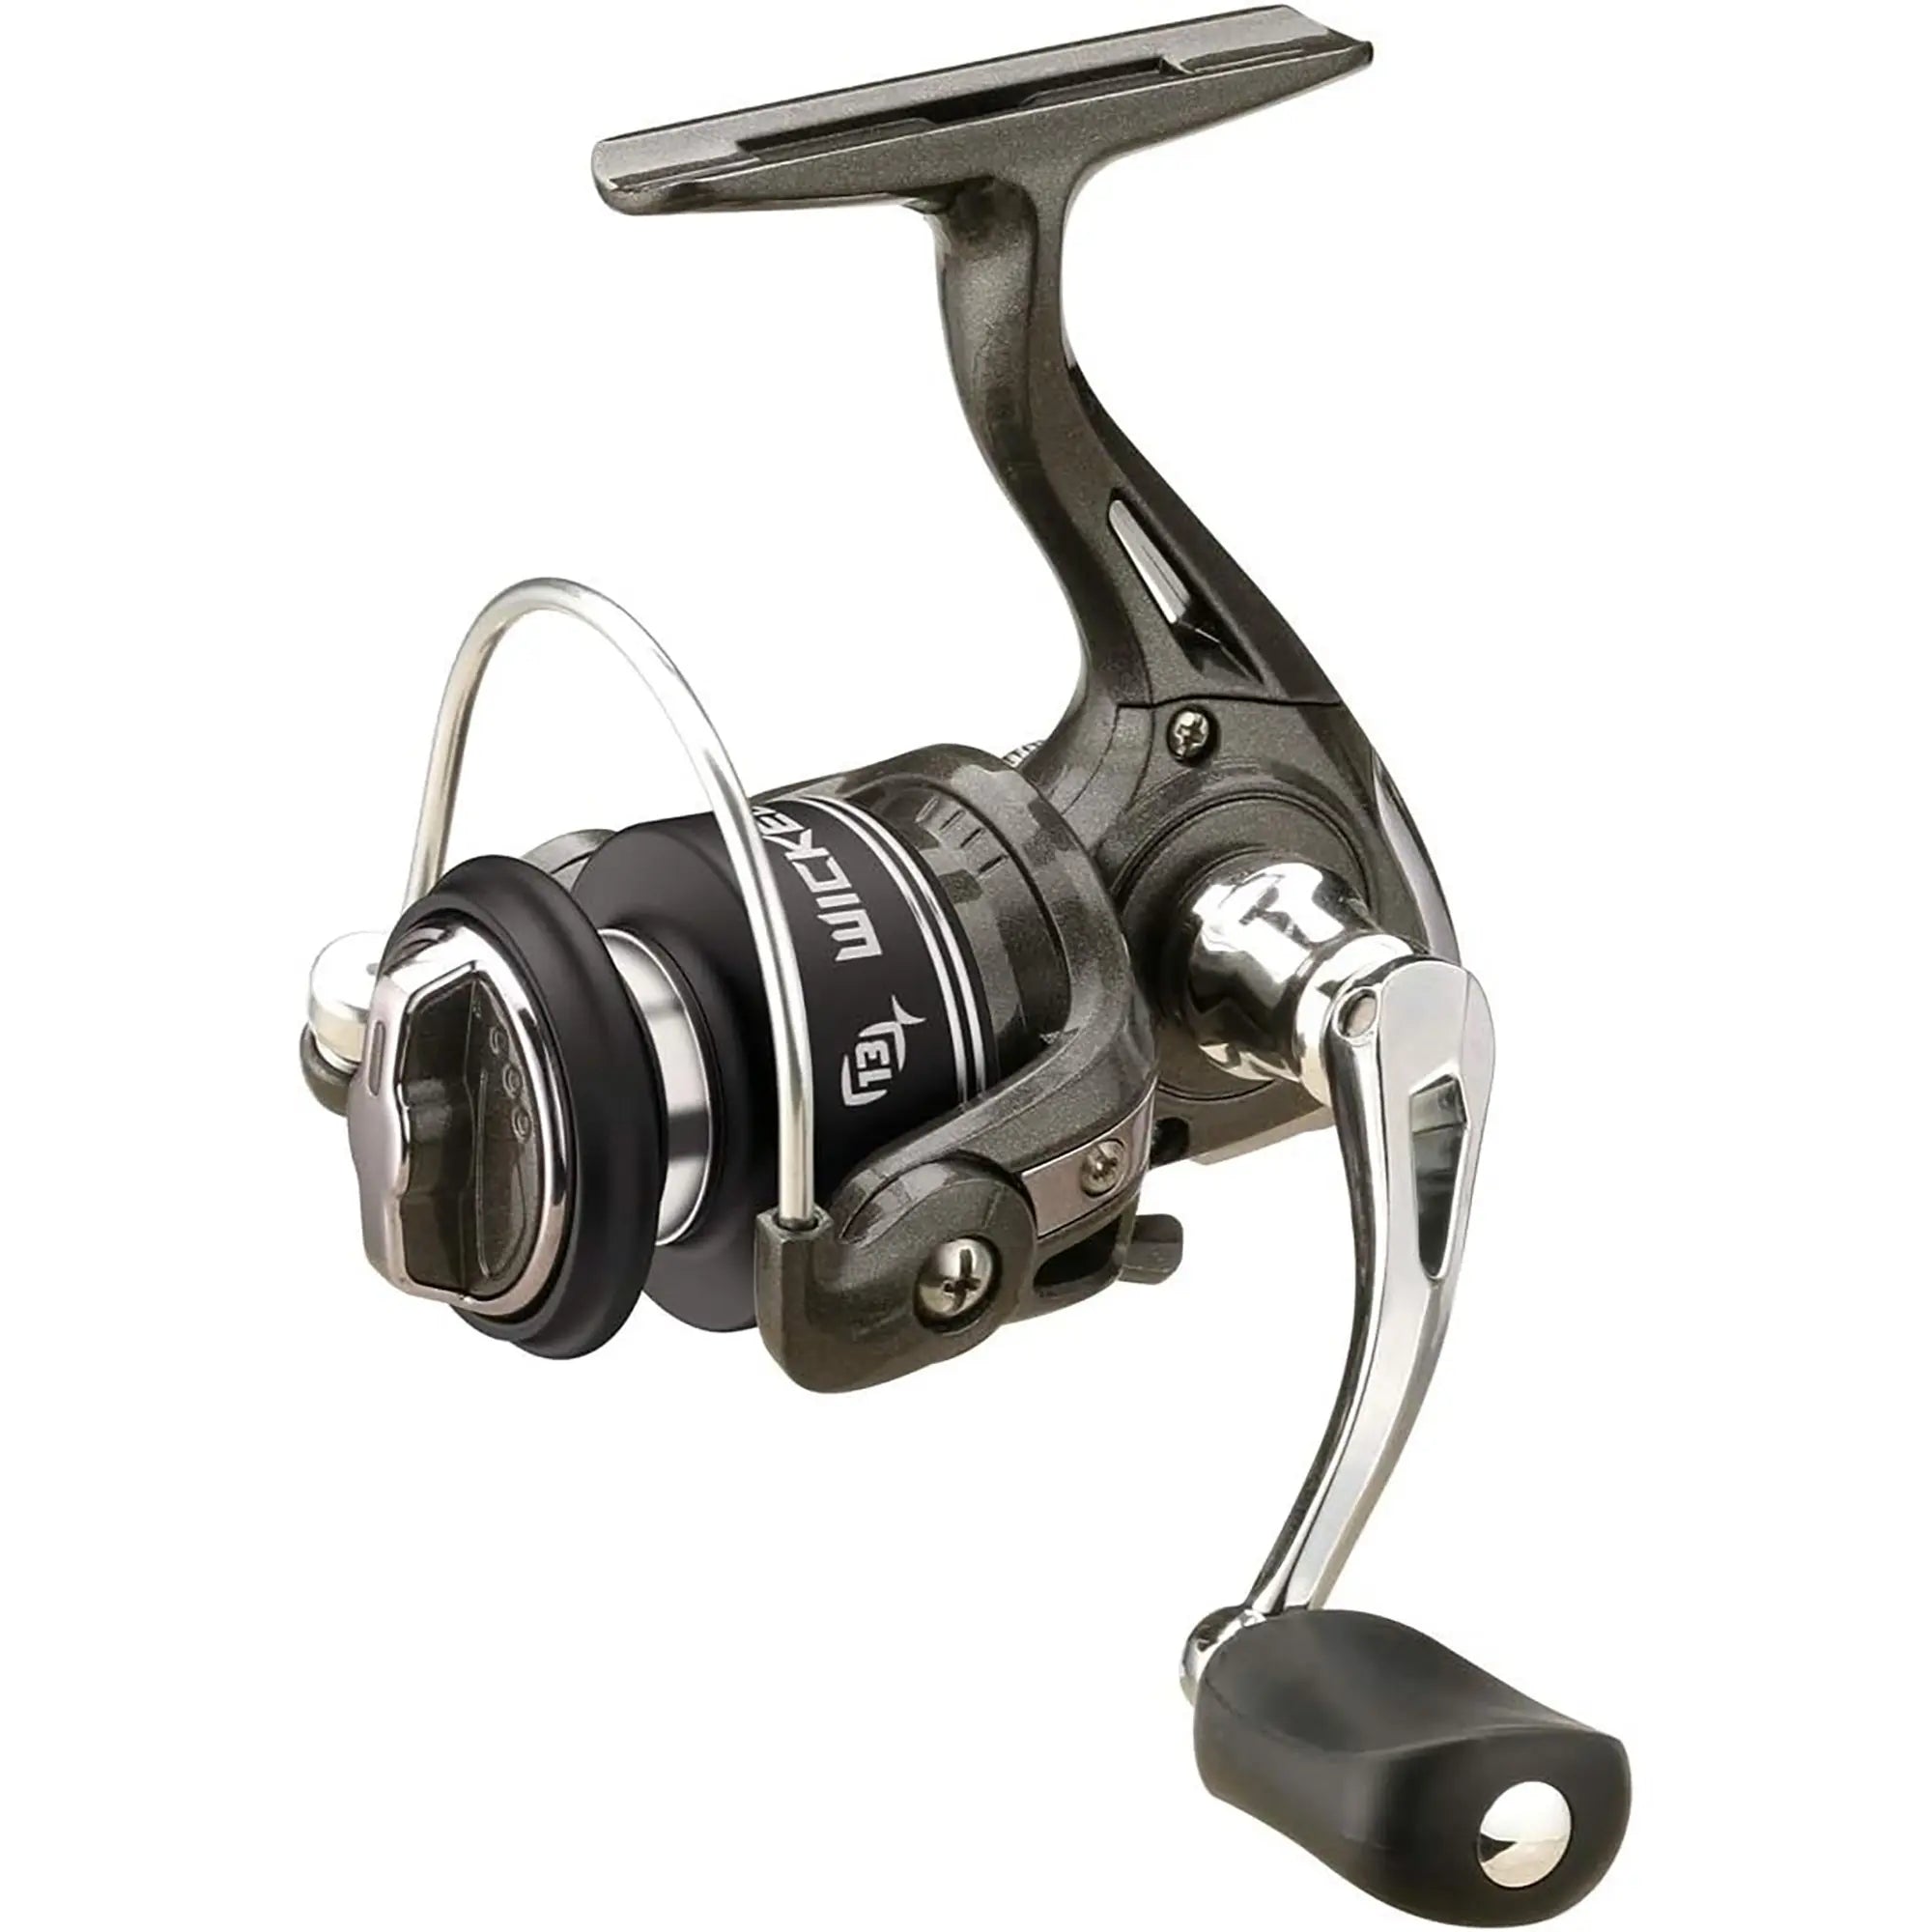 13 Fishing Wicked Long Stem Ice Fishing Spinning Reel (Clam Pack) 13 Fishing